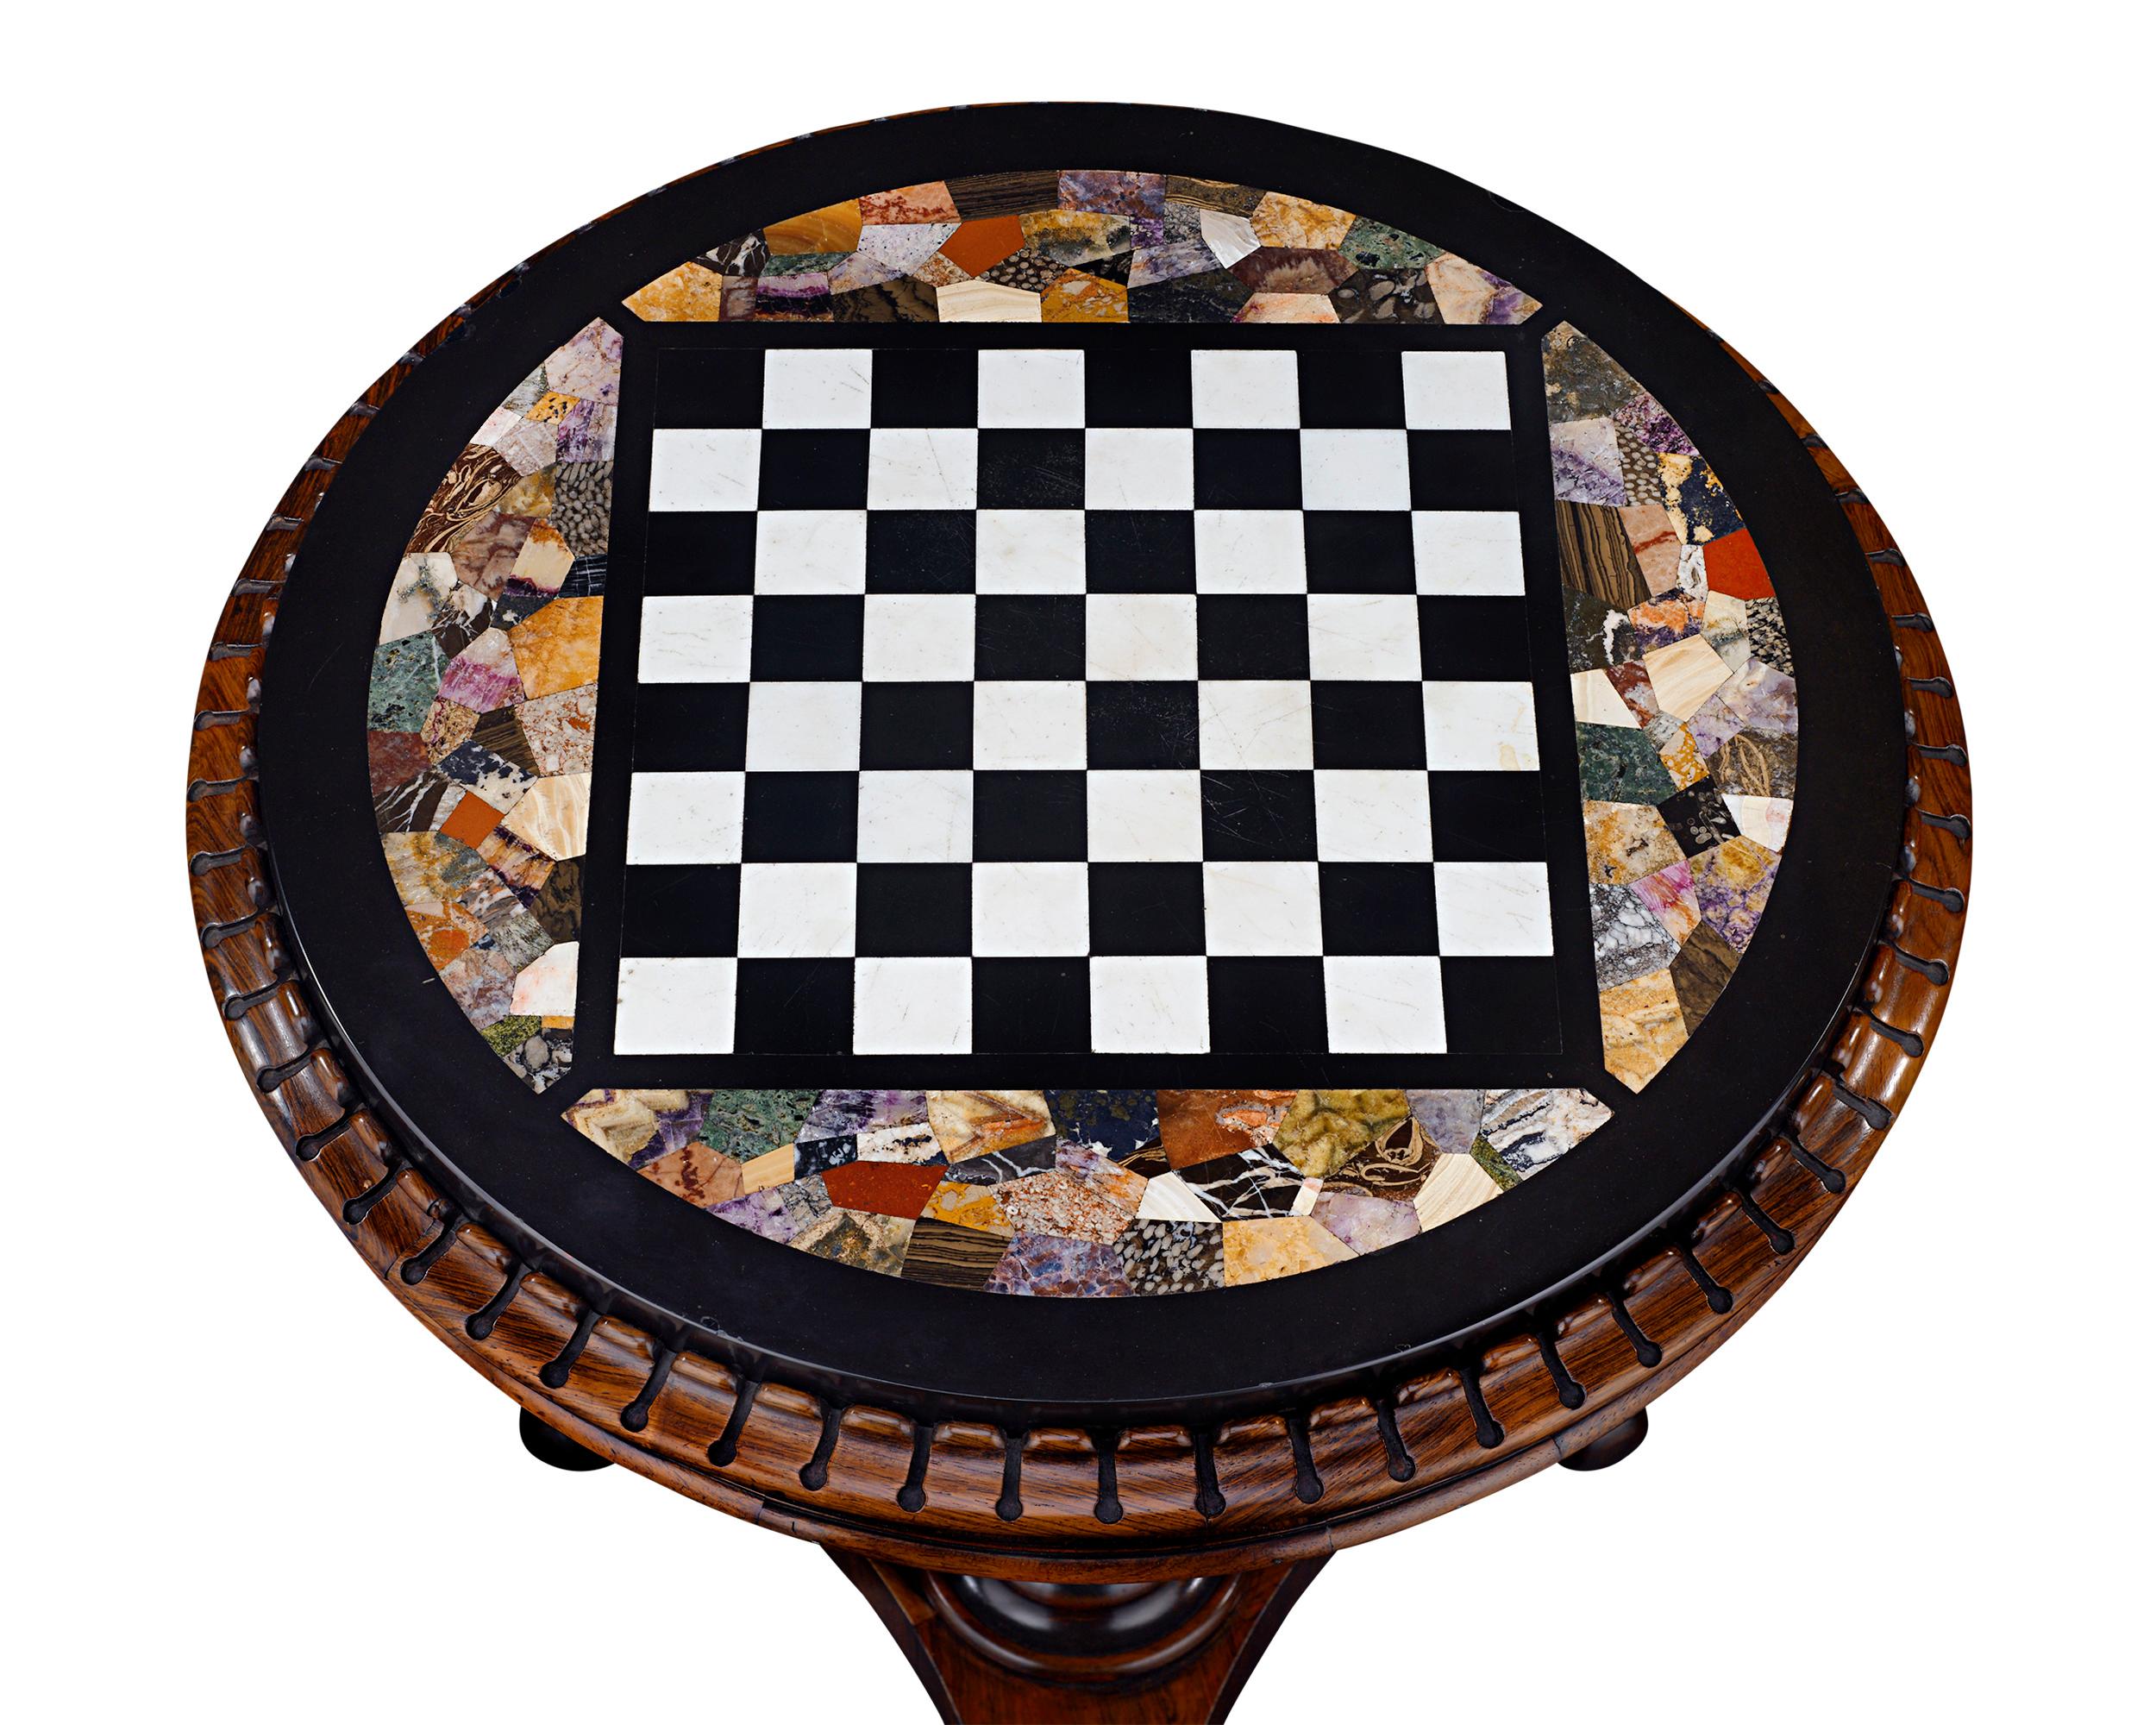 This magnificent games table incorporates some of the rarest English marbles, hardstones and fossil specimens, including Derbyshire Blue John. The scarcity of these coveted stones makes an inlaid circular piece of this size a truly exceptional and